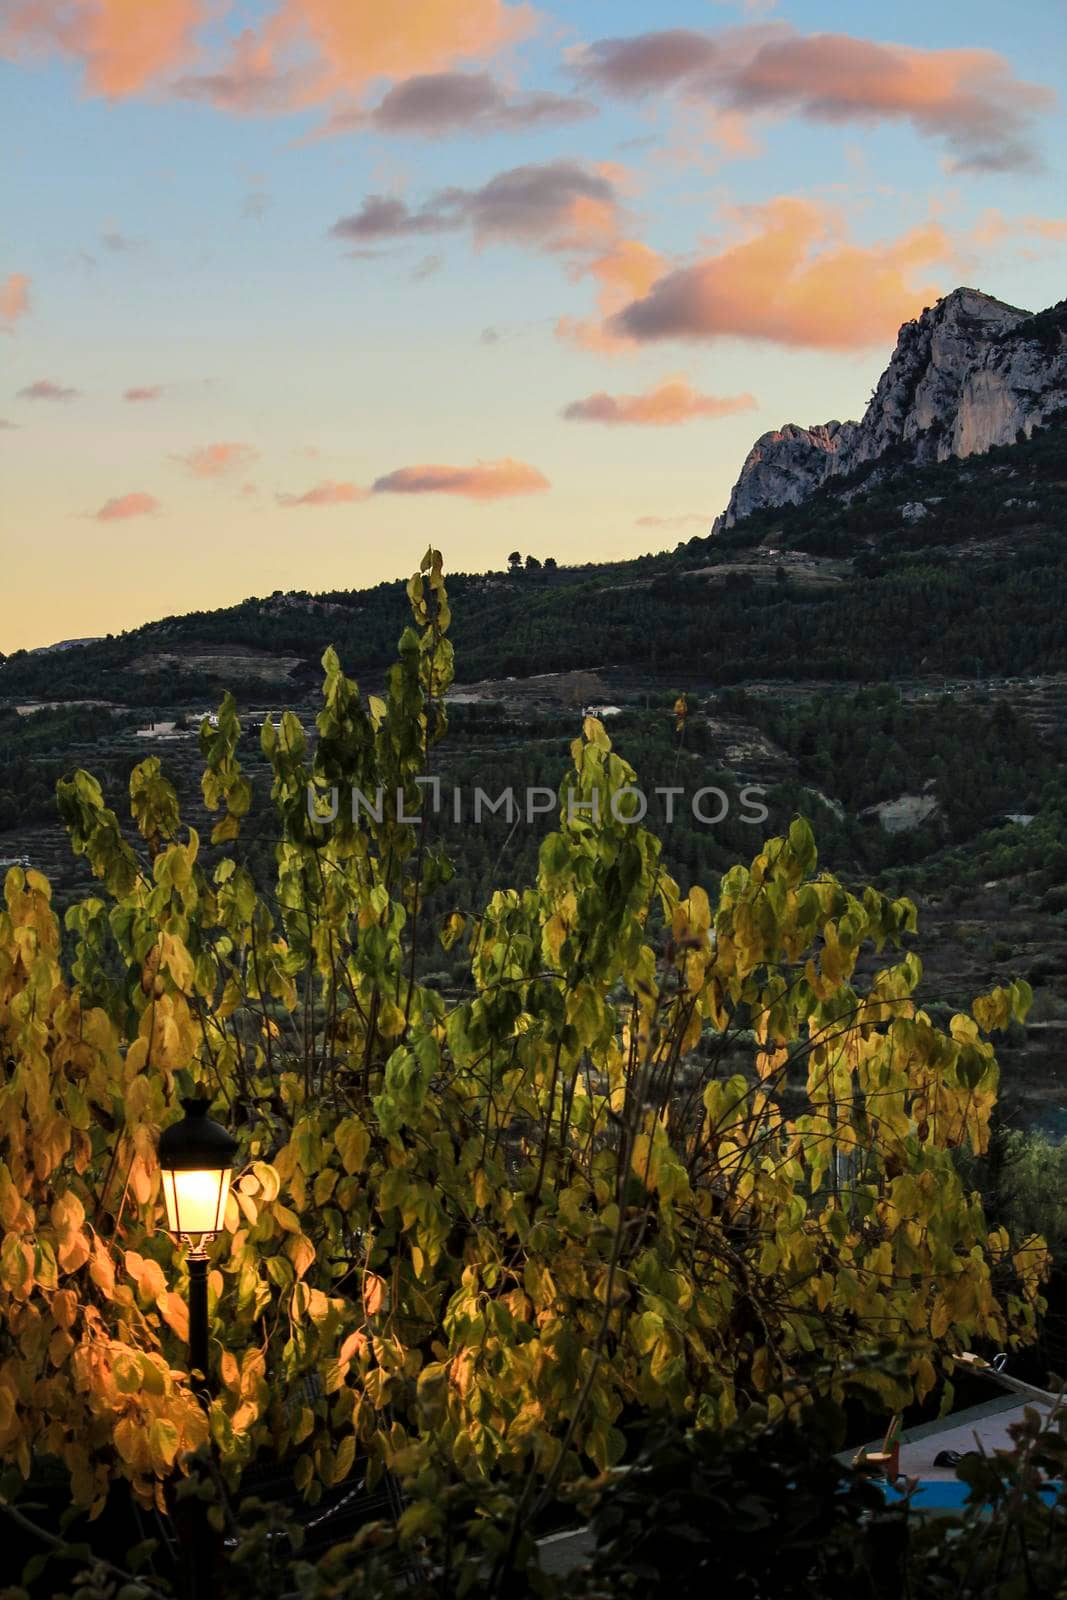 Sunset in Guadalest village with beautiful view of the valley by soniabonet